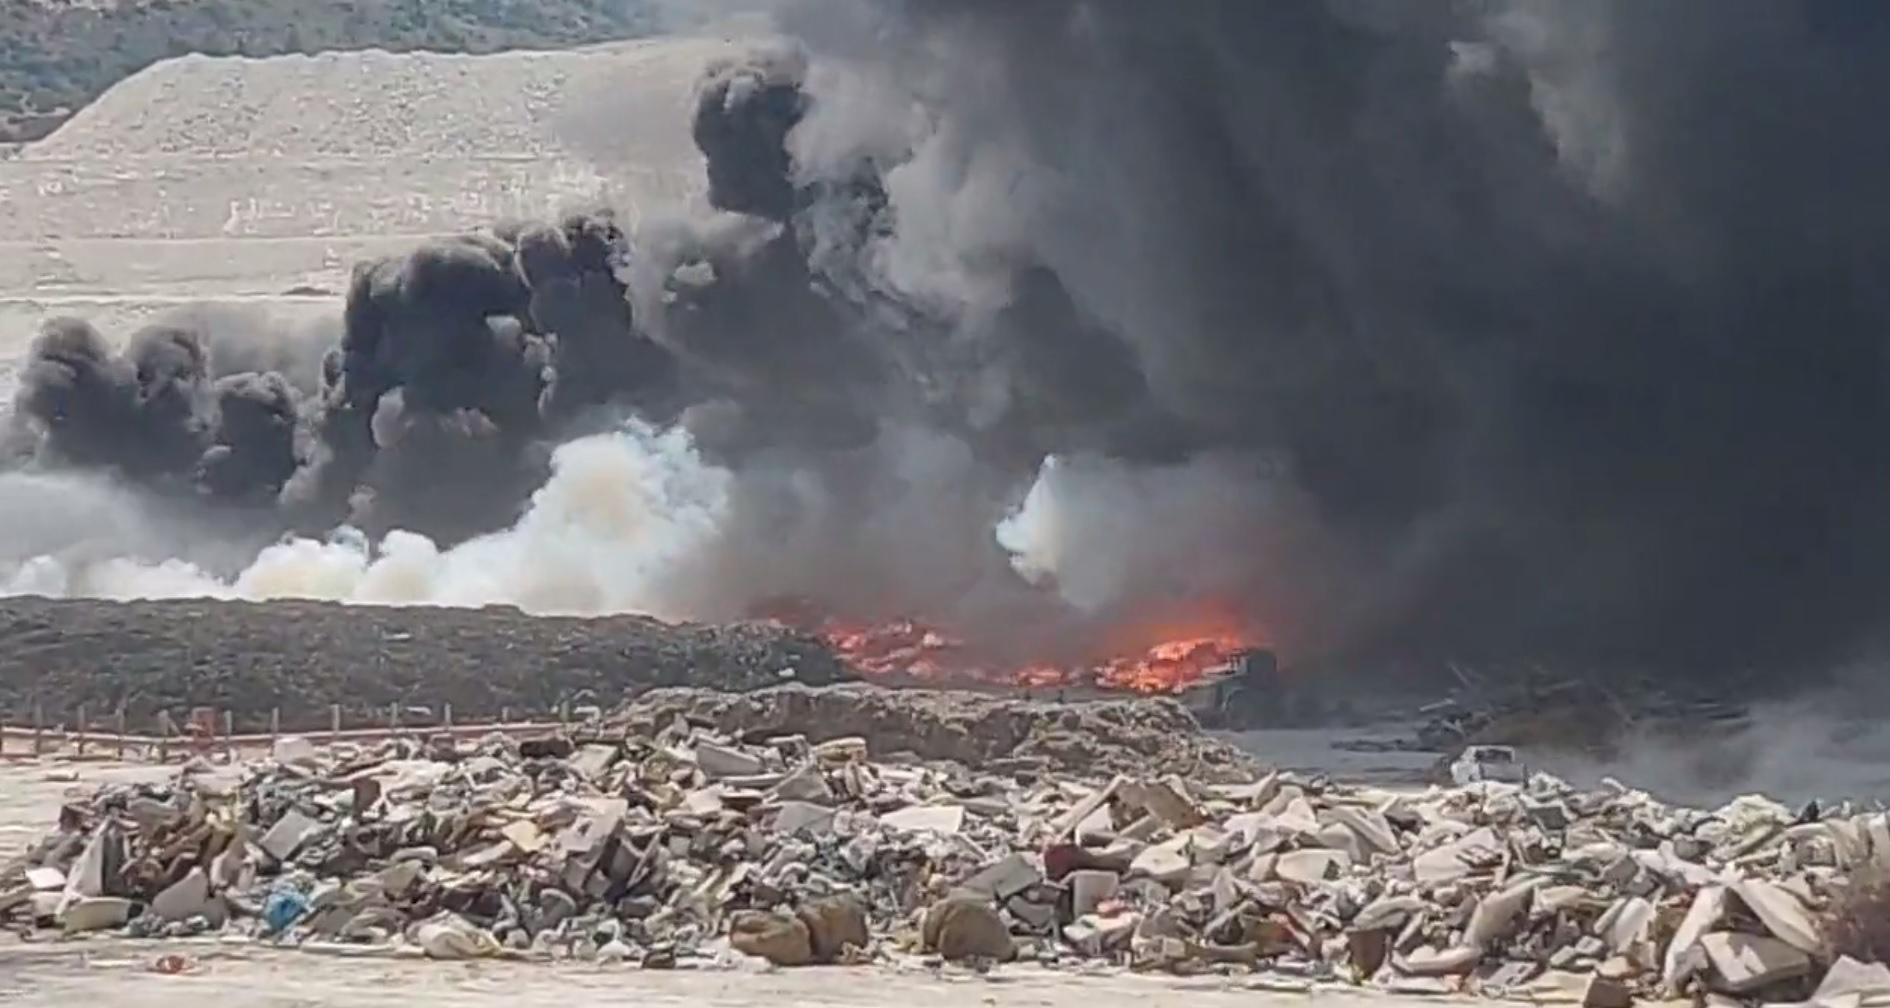 image Blaze in tyre storage area caused by shredder malfunction (Update 2 with video)